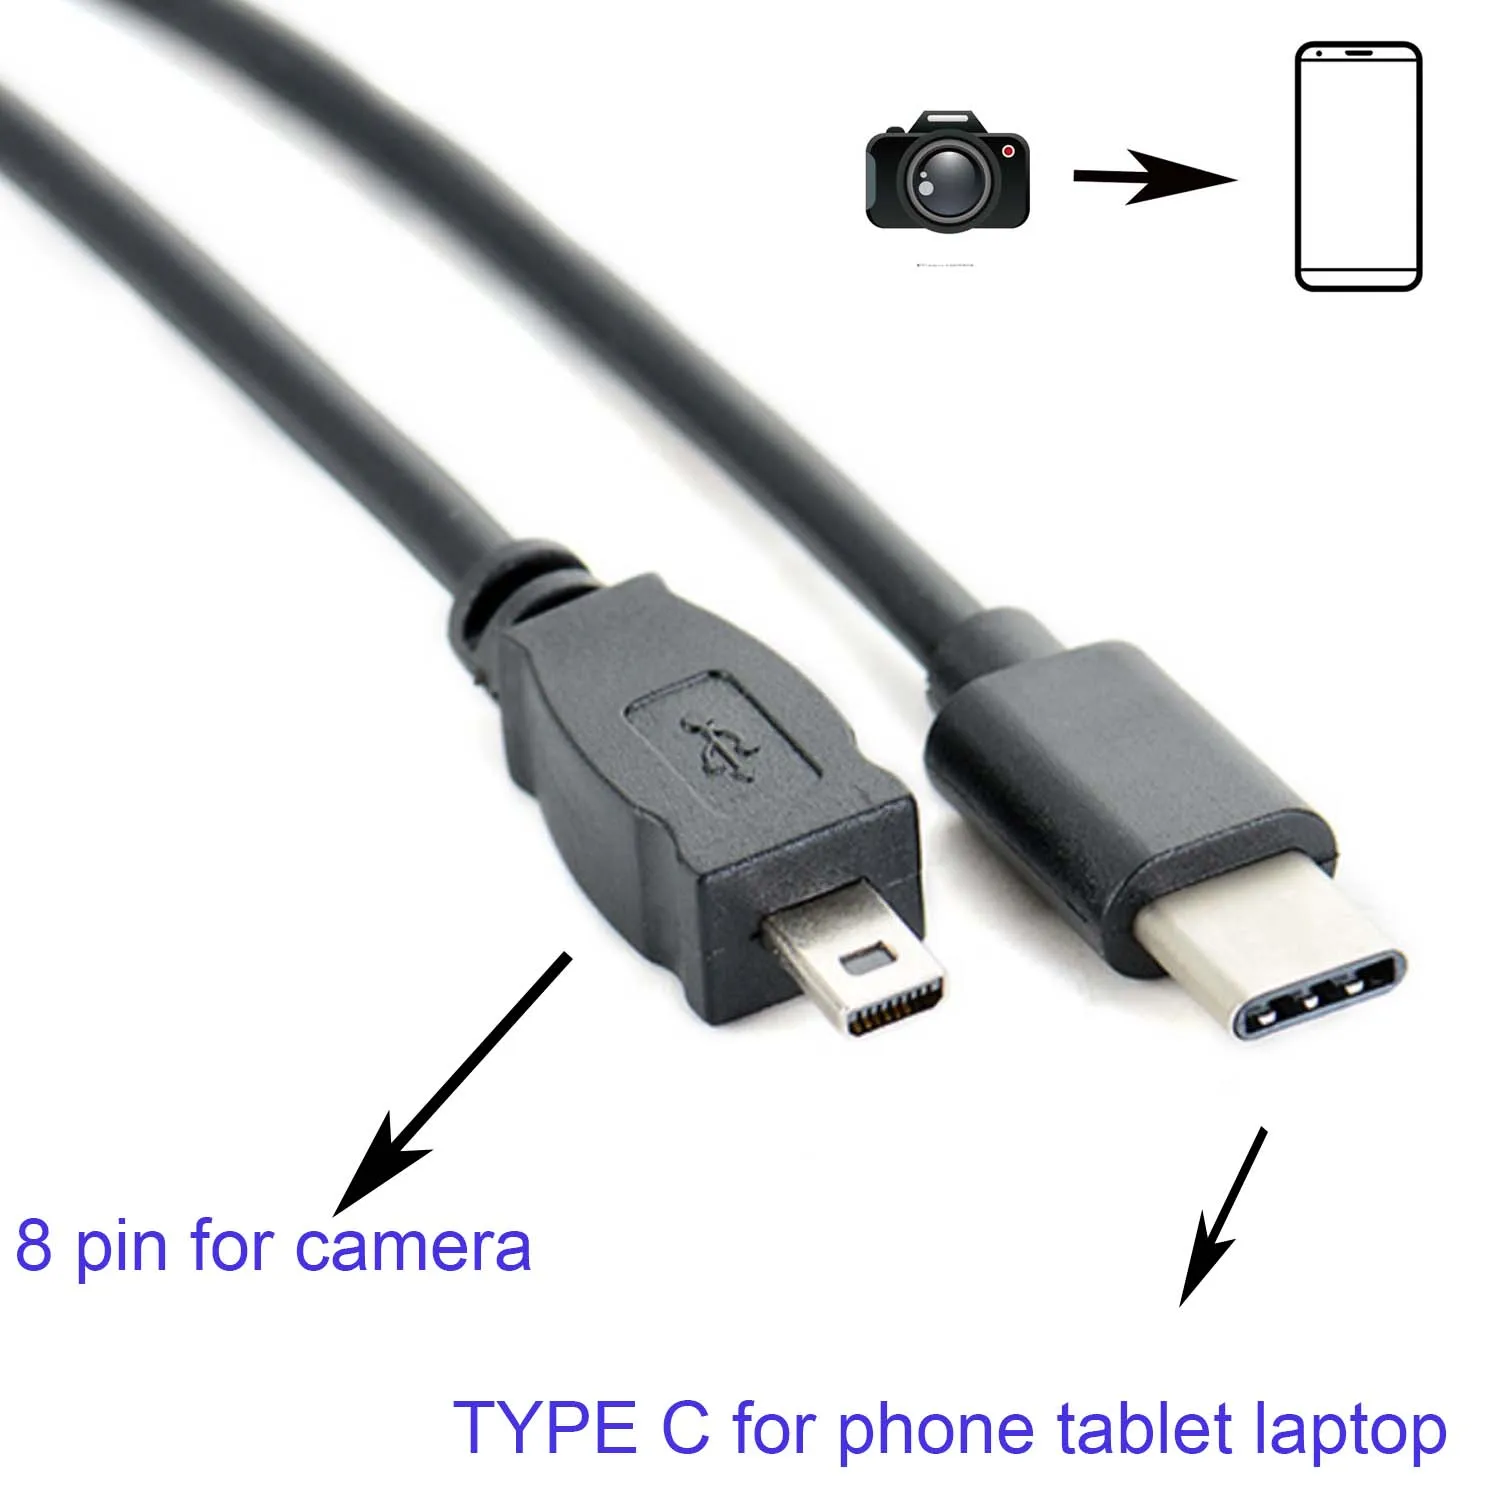 TYPE C OTG CABLE FOR Olympus CB-USB7 Ex-Pro C-25 540 550 560 575 D-705  715 720 camera to phone edit picture video